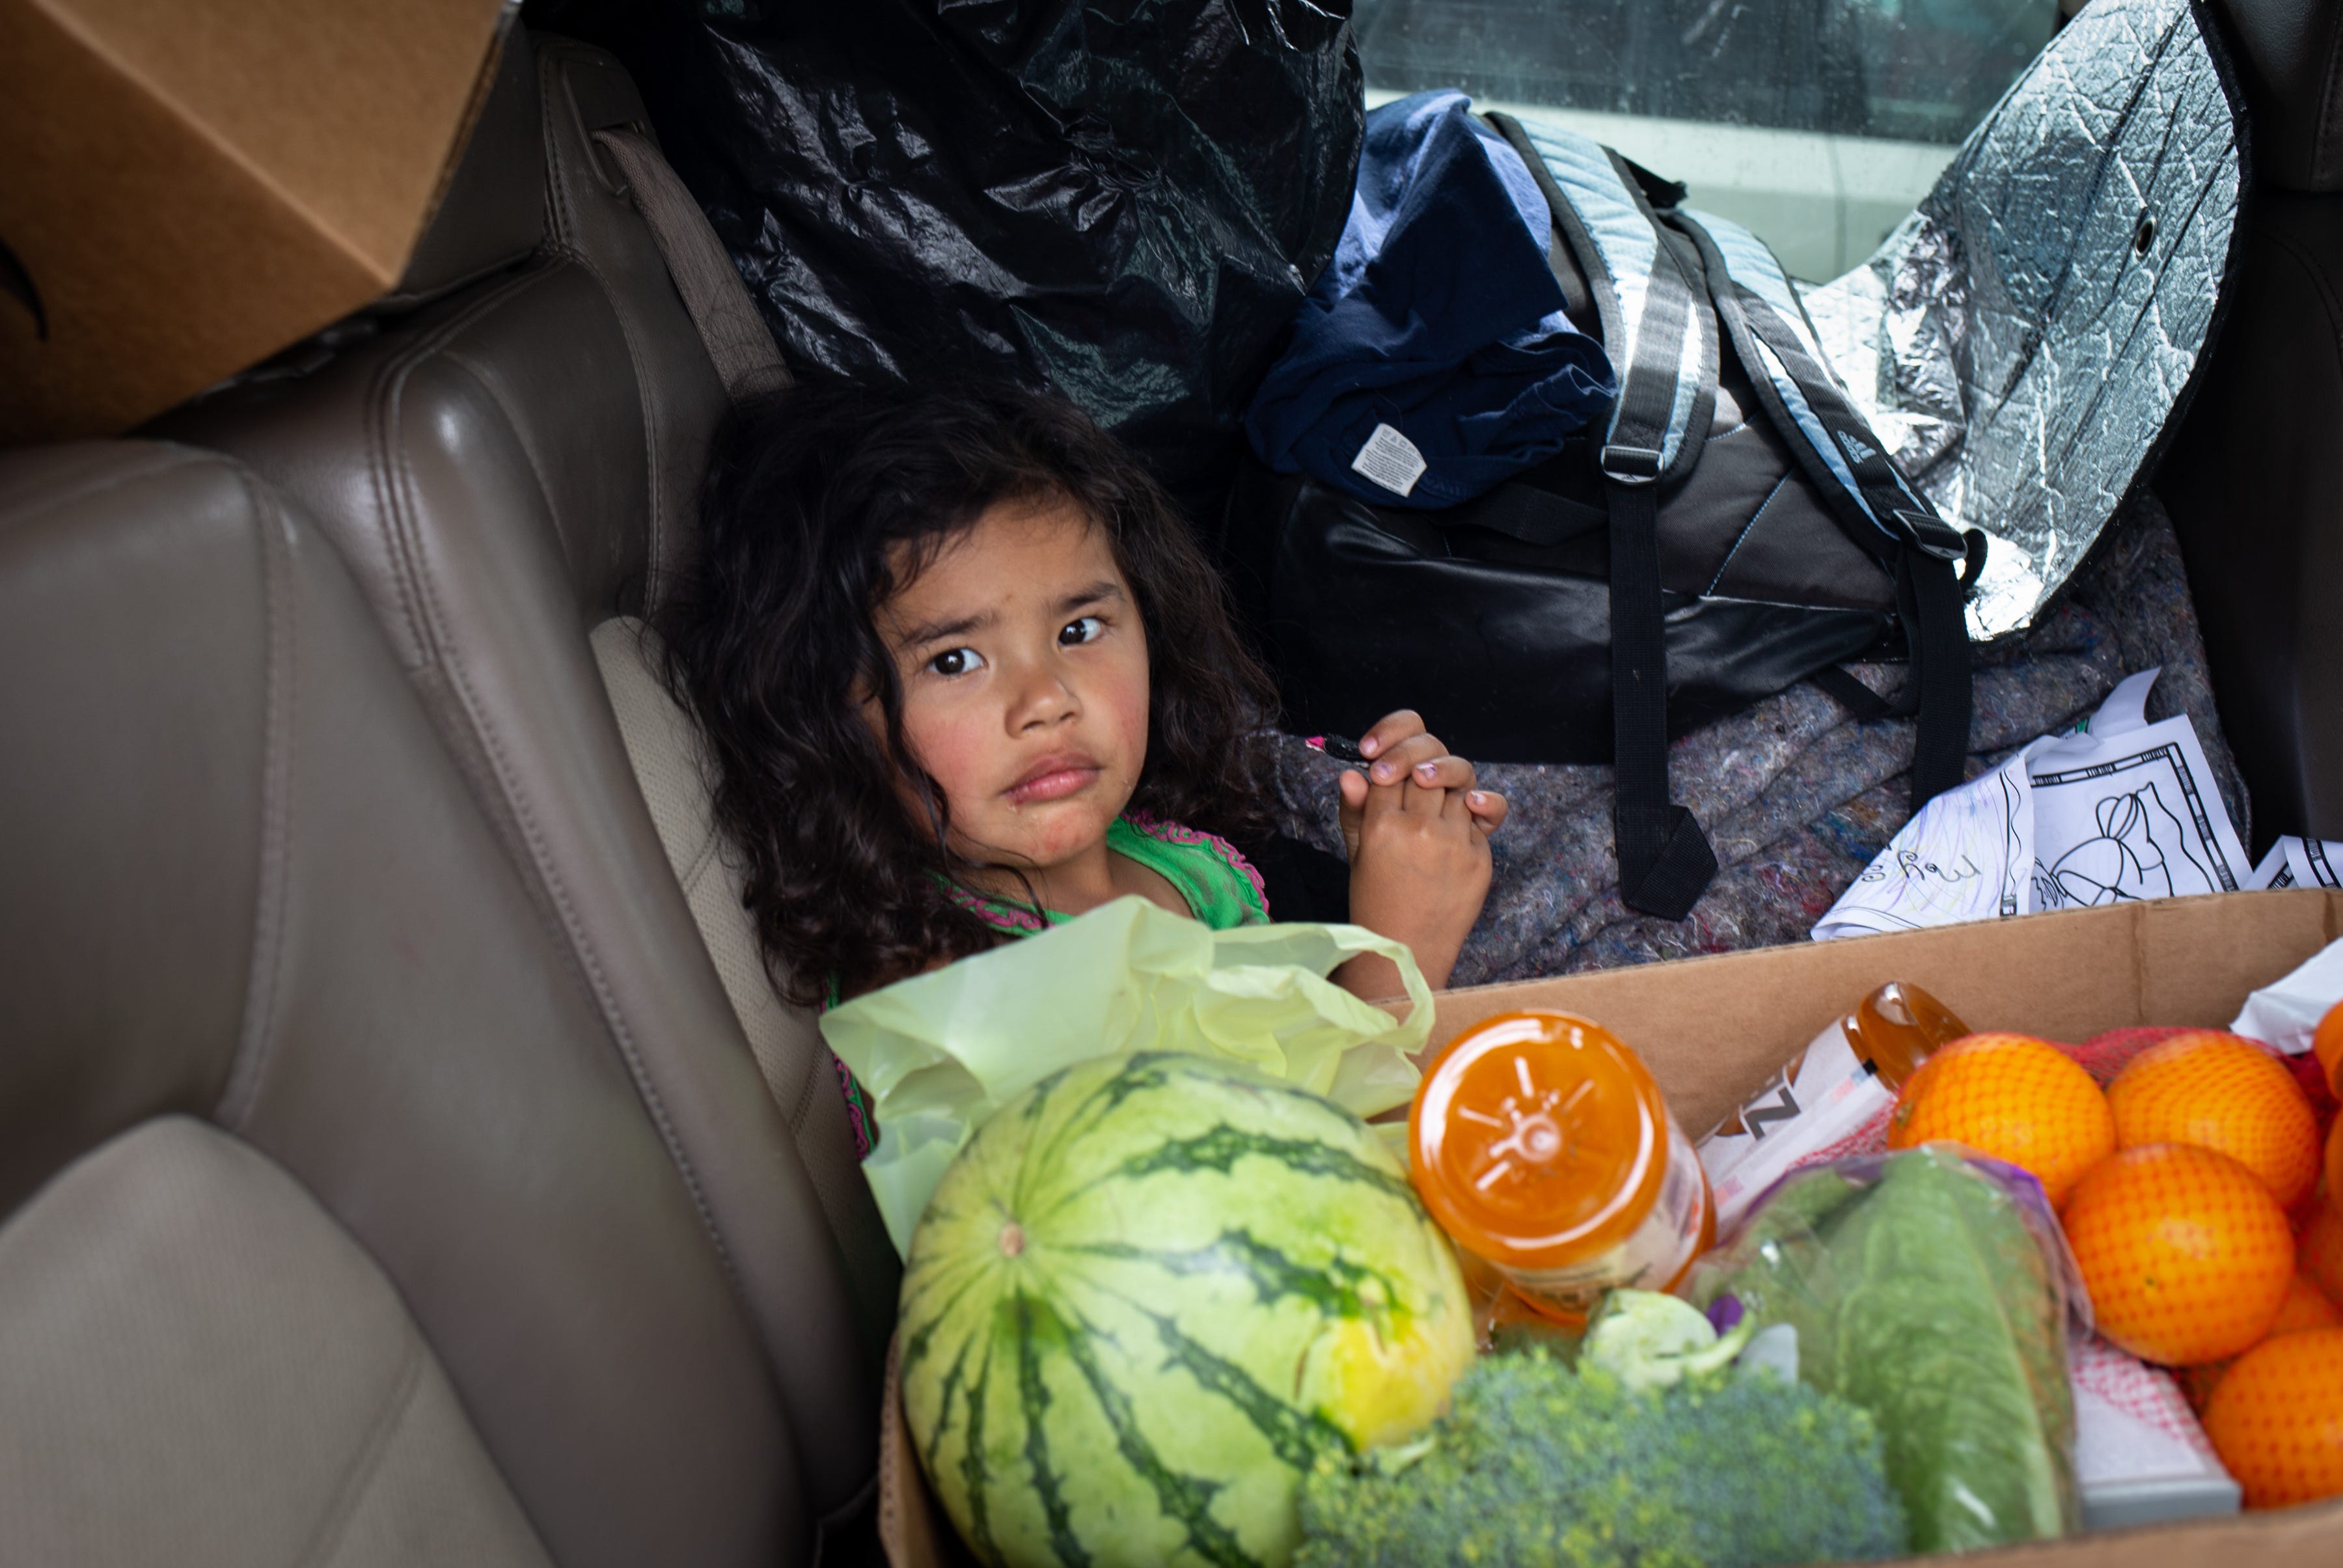 Amelia Calles, 3, sits next to a food box on March 25, 2020, at the St. Mary’s Food Bank Alliance in west Phoenix.